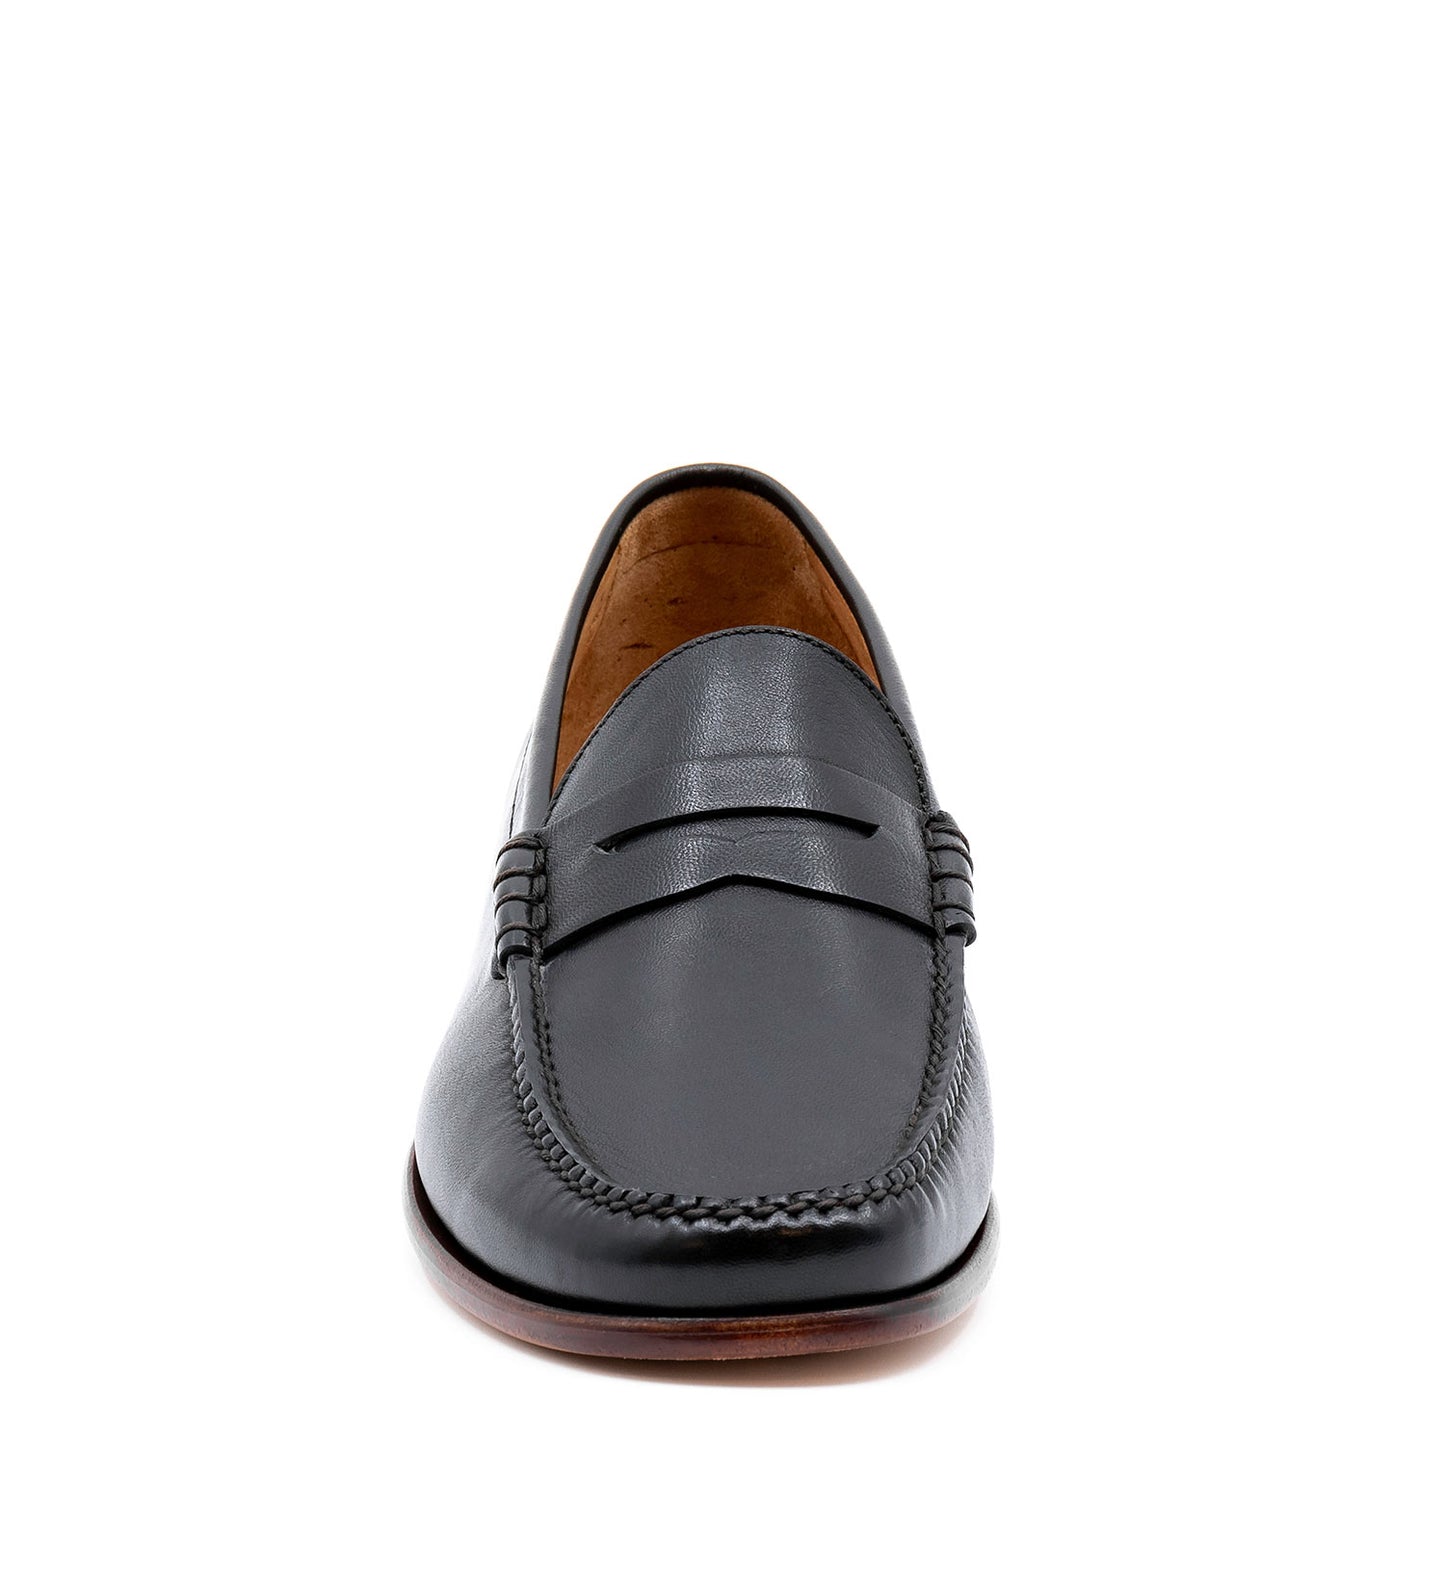 Martin Dingman Maxwell Penny Loafer